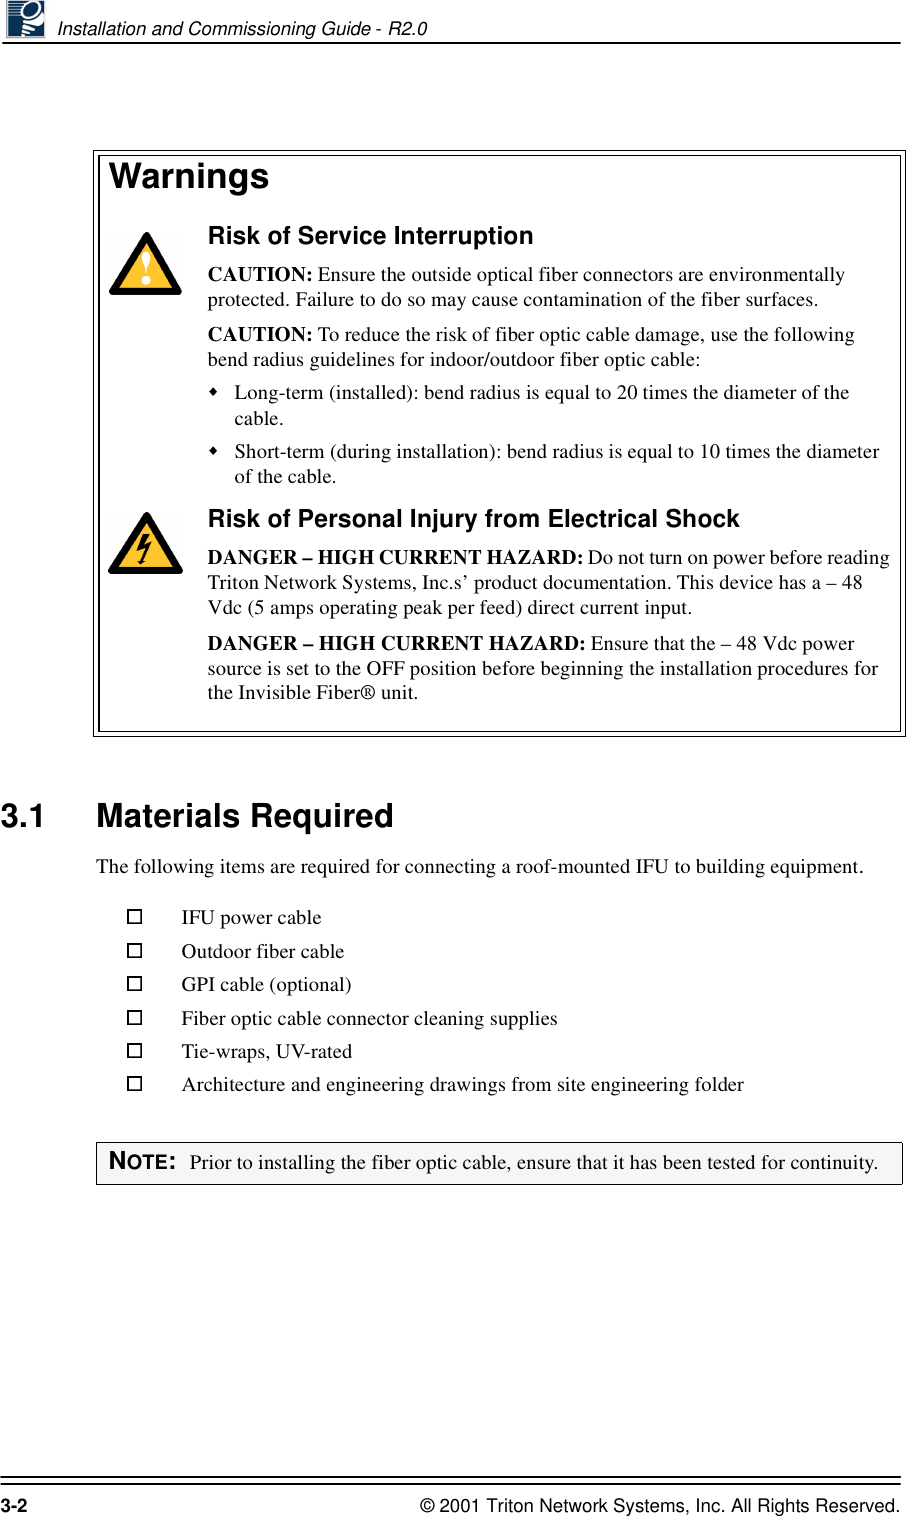  Installation and Commissioning Guide - R2.03-2 © 2001 Triton Network Systems, Inc. All Rights Reserved.3.1 Materials RequiredThe following items are required for connecting a roof-mounted IFU to building equipment. :DUQLQJVRisk of Service InterruptionCAUTION: Ensure the outside optical fiber connectors are environmentally protected. Failure to do so may cause contamination of the fiber surfaces.CAUTION: To reduce the risk of fiber optic cable damage, use the following bend radius guidelines for indoor/outdoor fiber optic cable: Long-term (installed): bend radius is equal to 20 times the diameter of the cable.Short-term (during installation): bend radius is equal to 10 times the diameter of the cable.Risk of Personal Injury from Electrical ShockDANGER – HIGH CURRENT HAZARD: Do not turn on power before reading Triton Network Systems, Inc.s’ product documentation. This device has a – 48 Vdc (5 amps operating peak per feed) direct current input.DANGER – HIGH CURRENT HAZARD: Ensure that the – 48 Vdc power source is set to the OFF position before beginning the installation procedures for the Invisible Fiber® unit. IFU power cableOutdoor fiber cableGPI cable (optional)Fiber optic cable connector cleaning suppliesTie-wraps, UV-ratedArchitecture and engineering drawings from site engineering folderNOTE:  Prior to installing the fiber optic cable, ensure that it has been tested for continuity.